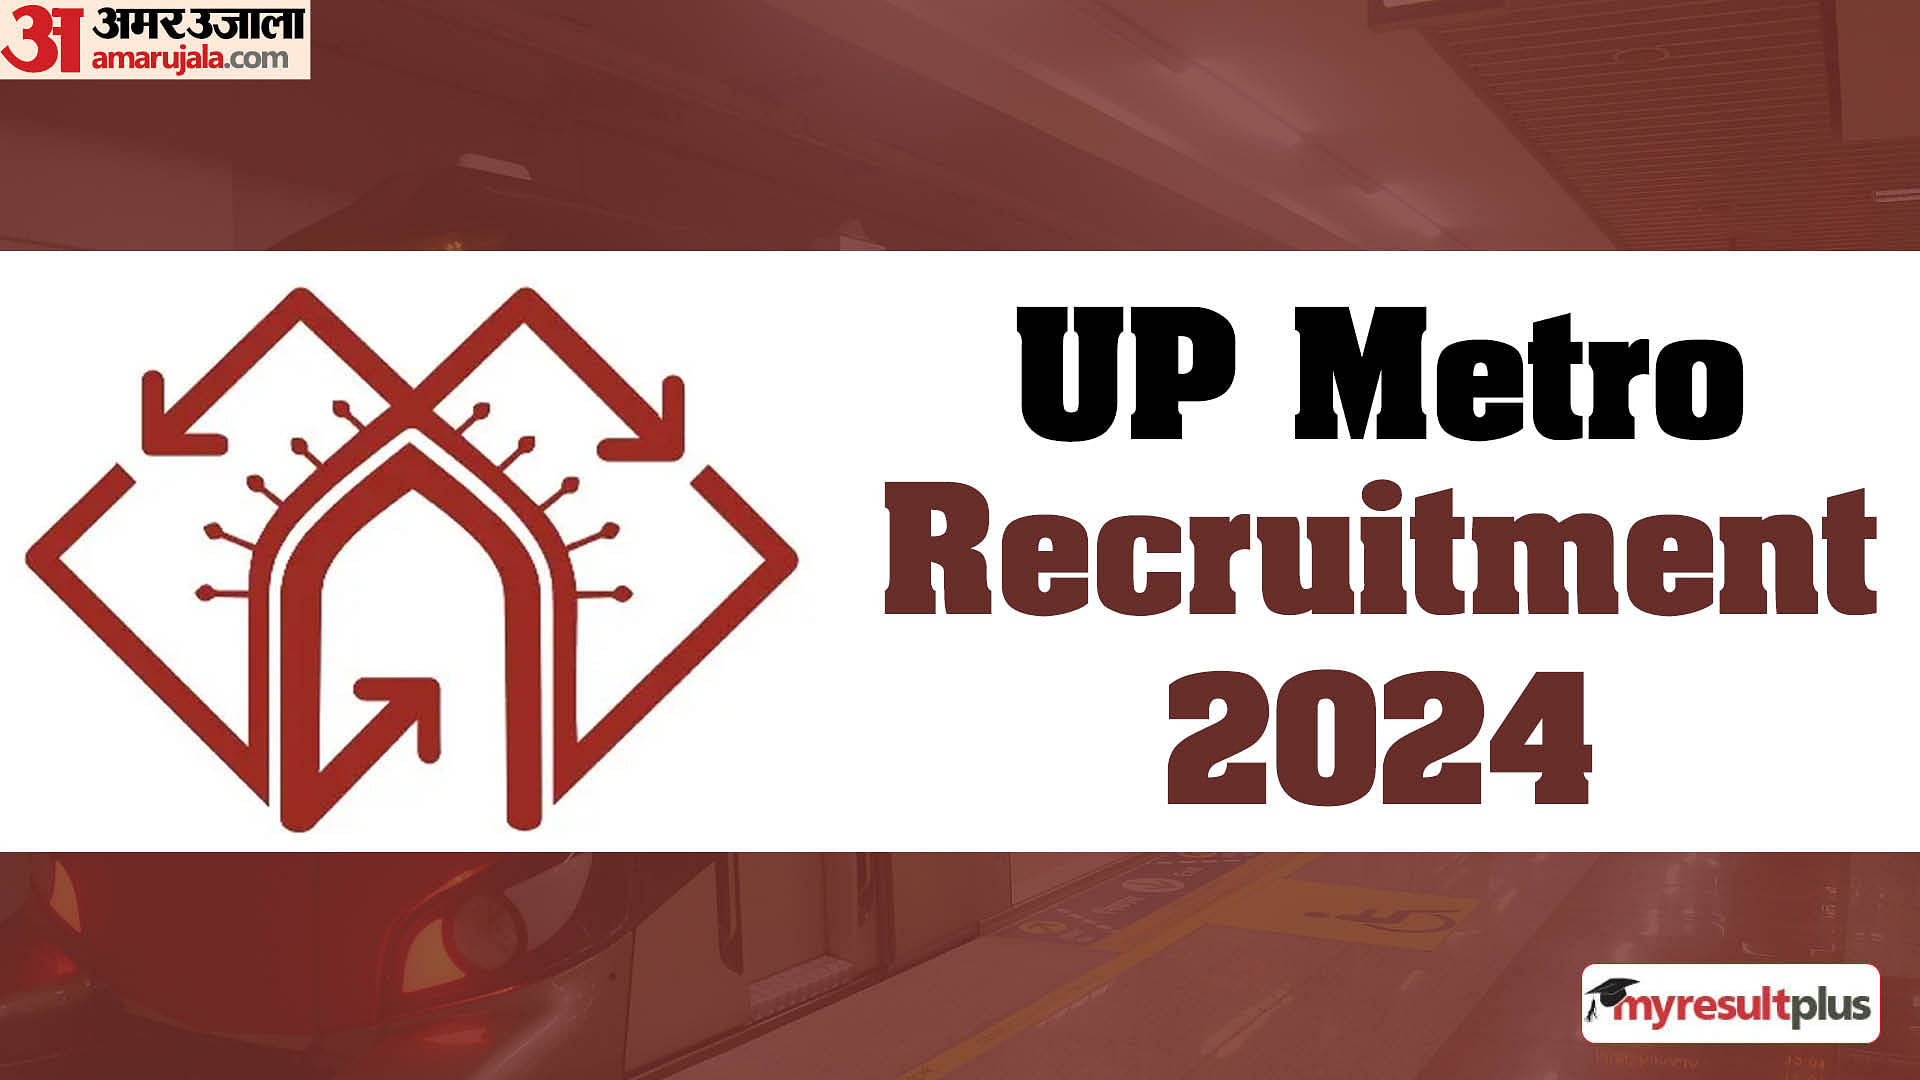 UP Metro recruitment 2024 result released, Check how to download and vacancy details here